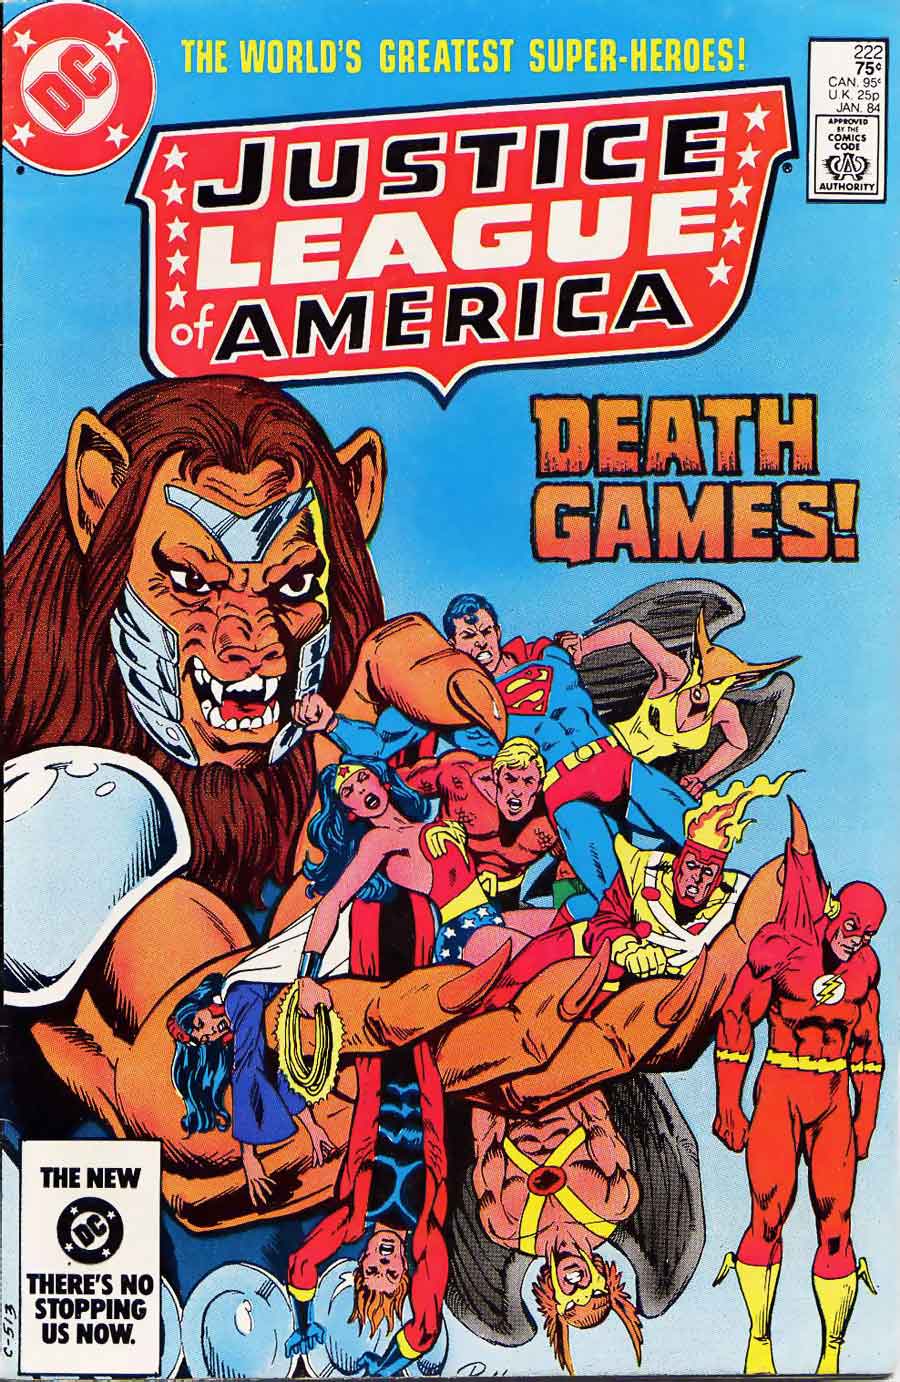 Justice League of America #222 by Gerry Conway, Chuck Patton and Romeo Tanghal